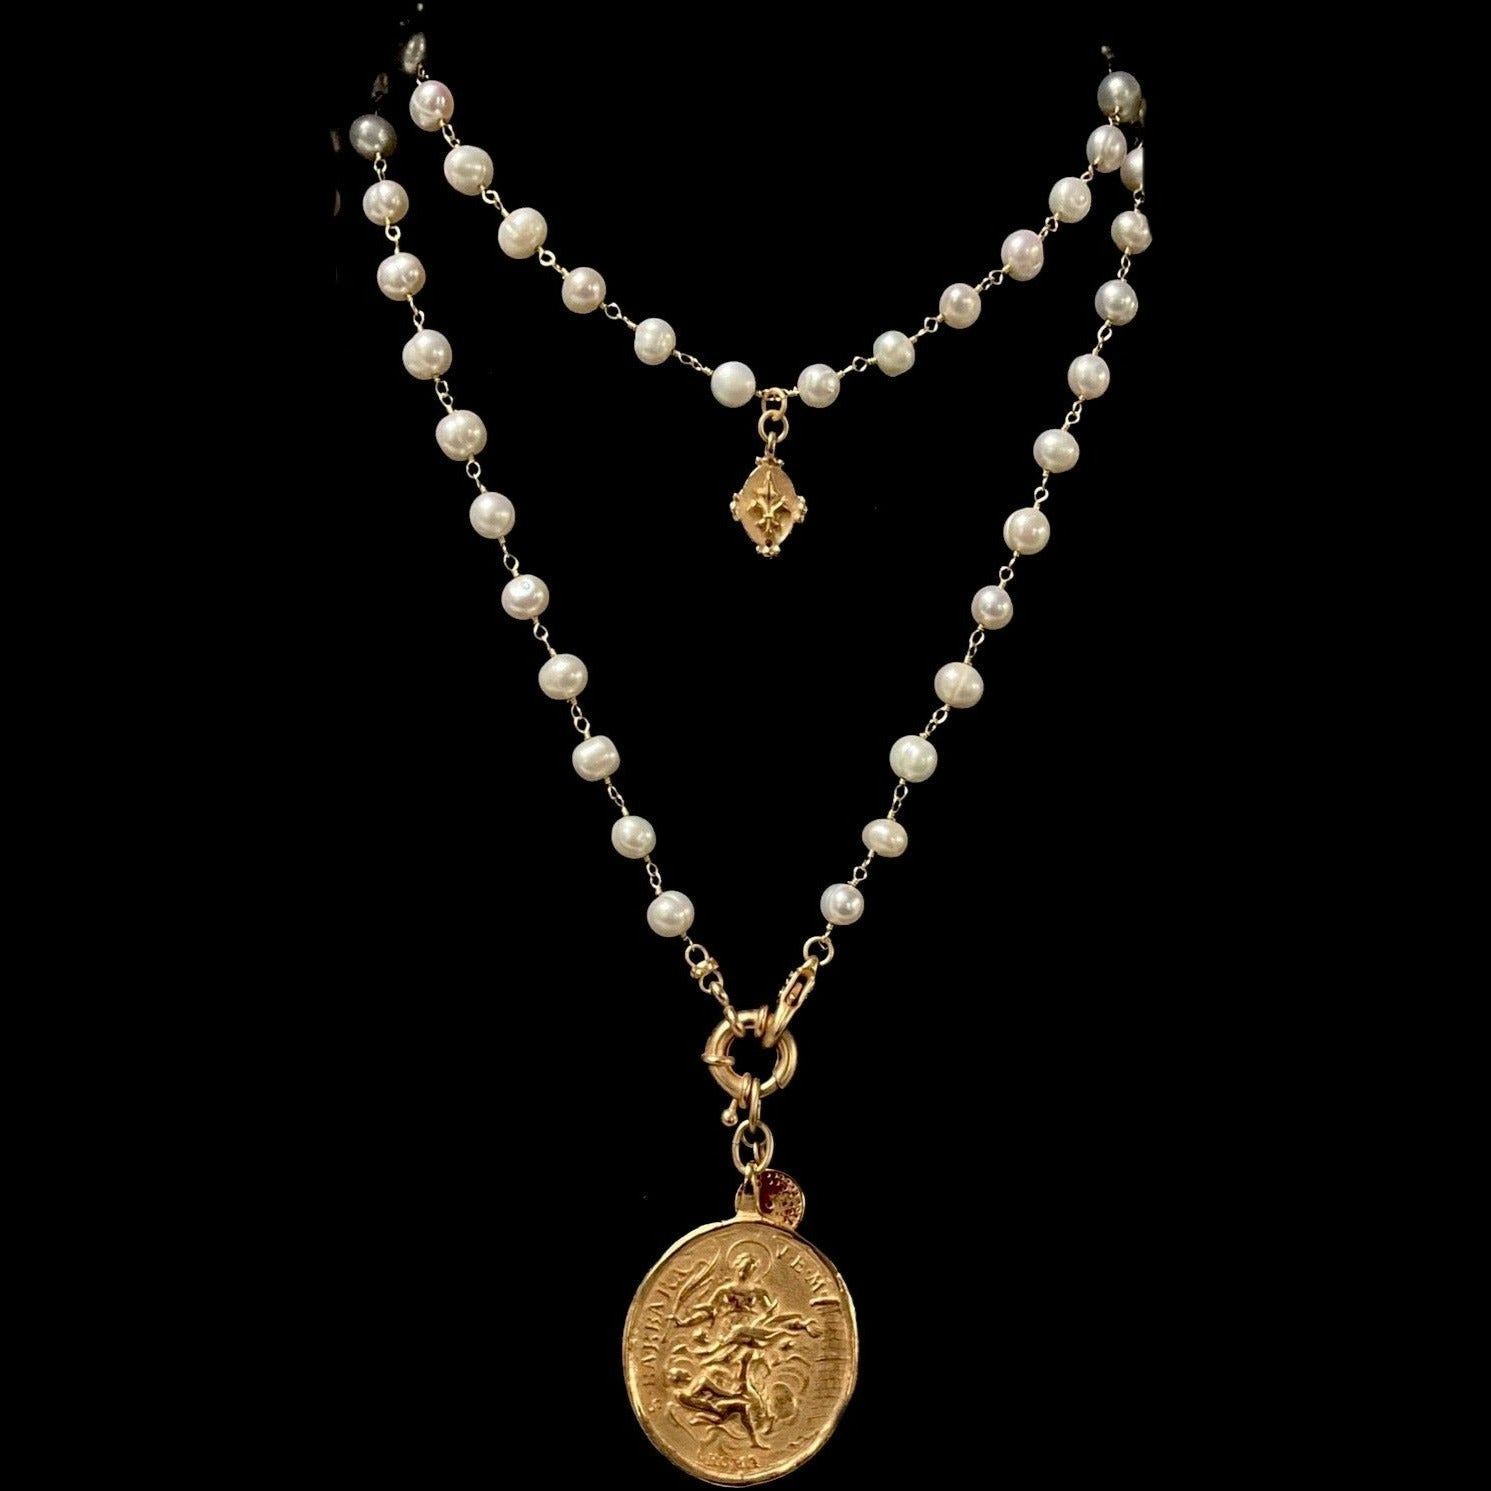 True North Madonna and Saint Barbara Freshwater Pearl Necklace - Gold